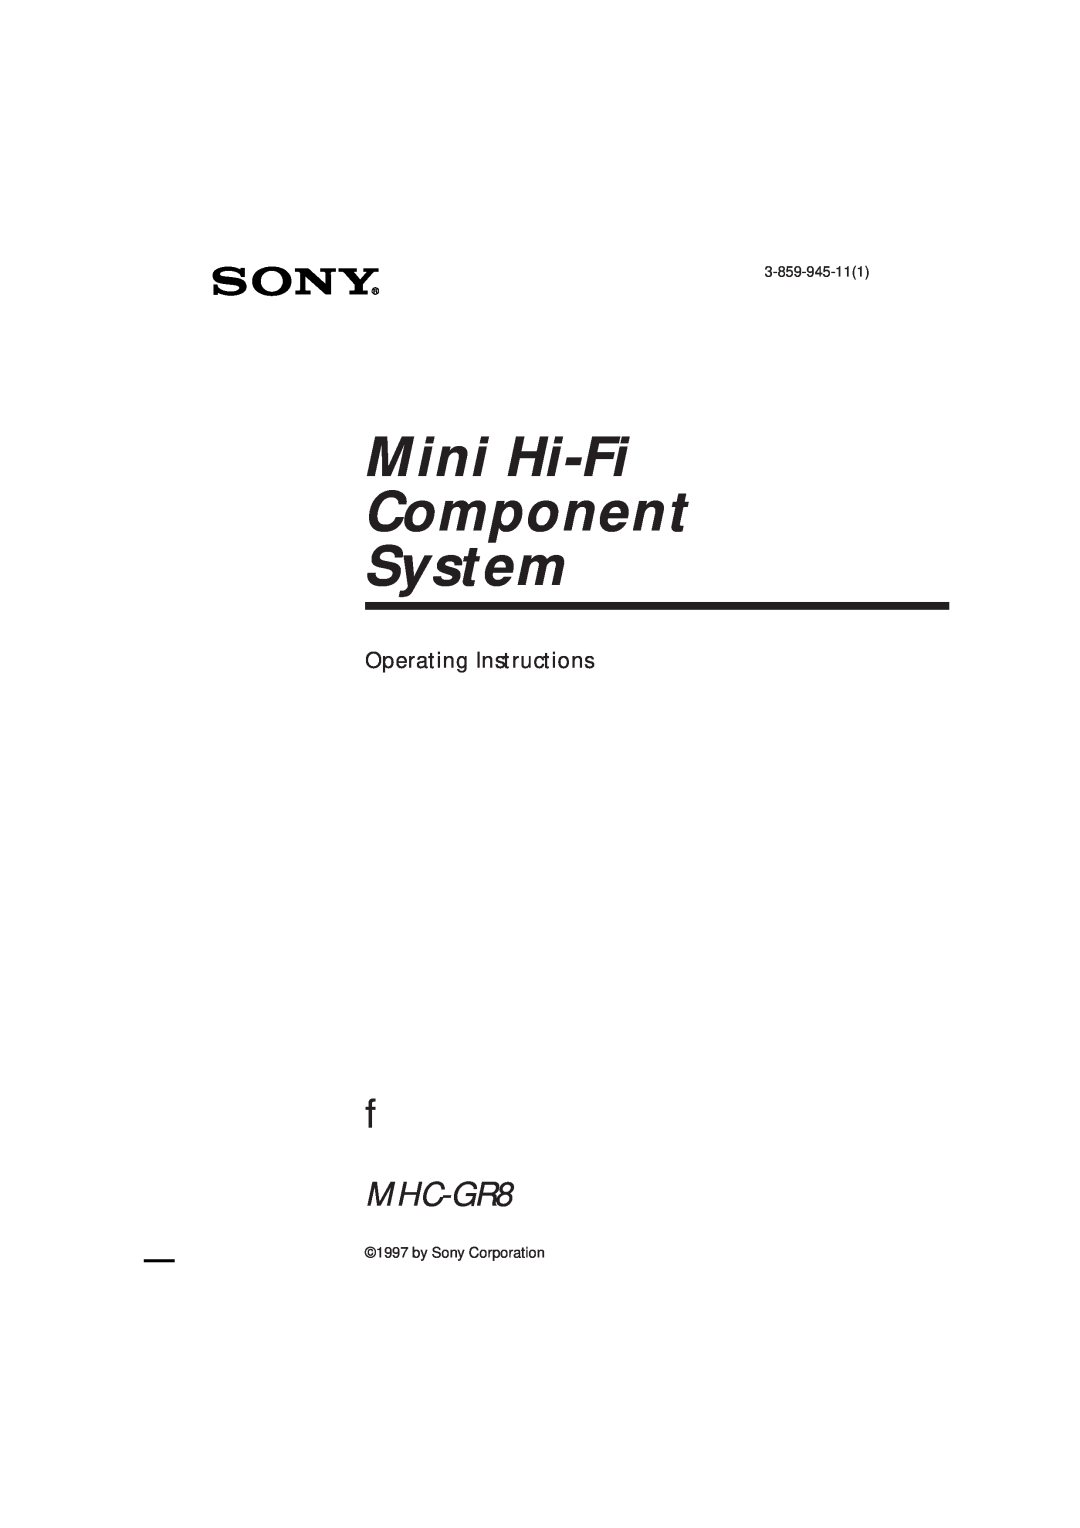 Sony MHC-GR8 manual 3-859-945-111, by Sony Corporation, Mini Hi-Fi Component System, Operating Instructions 